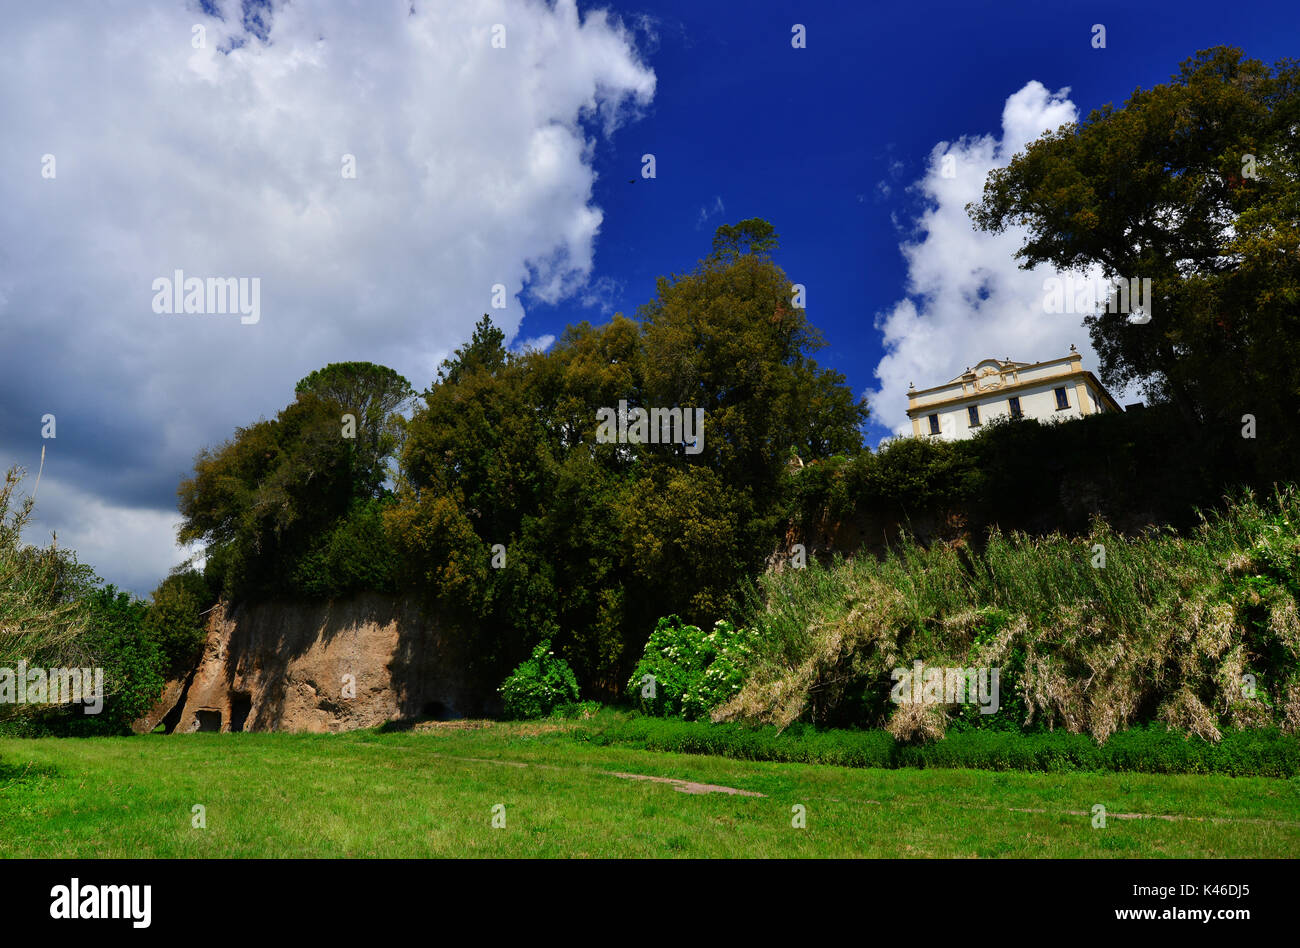 Villa Savorelli public park in the ancient medieval town of Sutri, seen from the vally with prehistoric caves Stock Photo